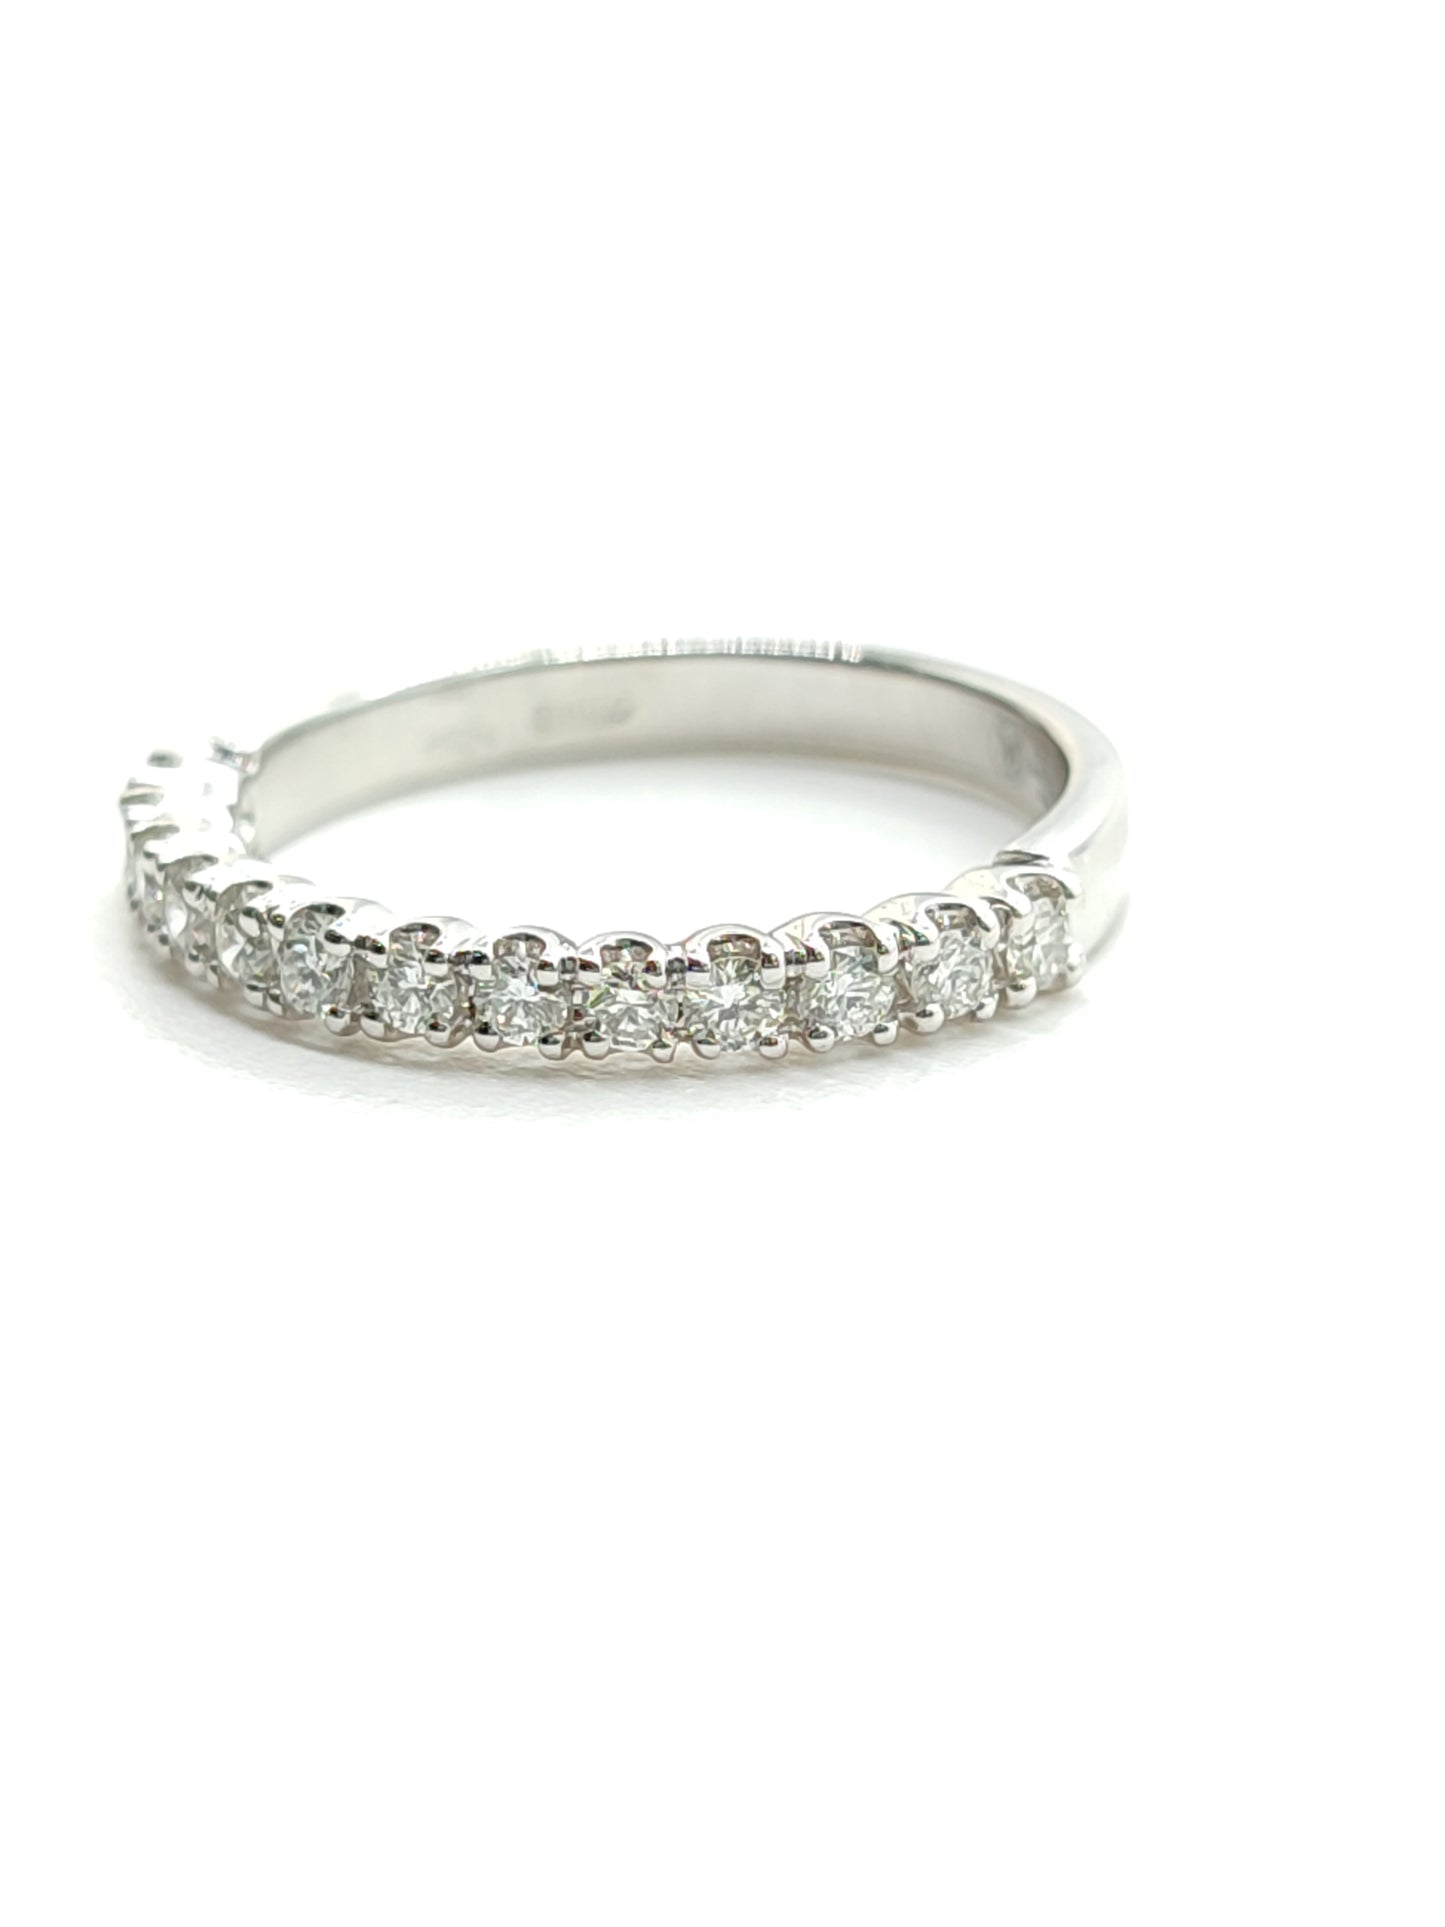 Half wedding band ring in gold with 0.31ct diamonds